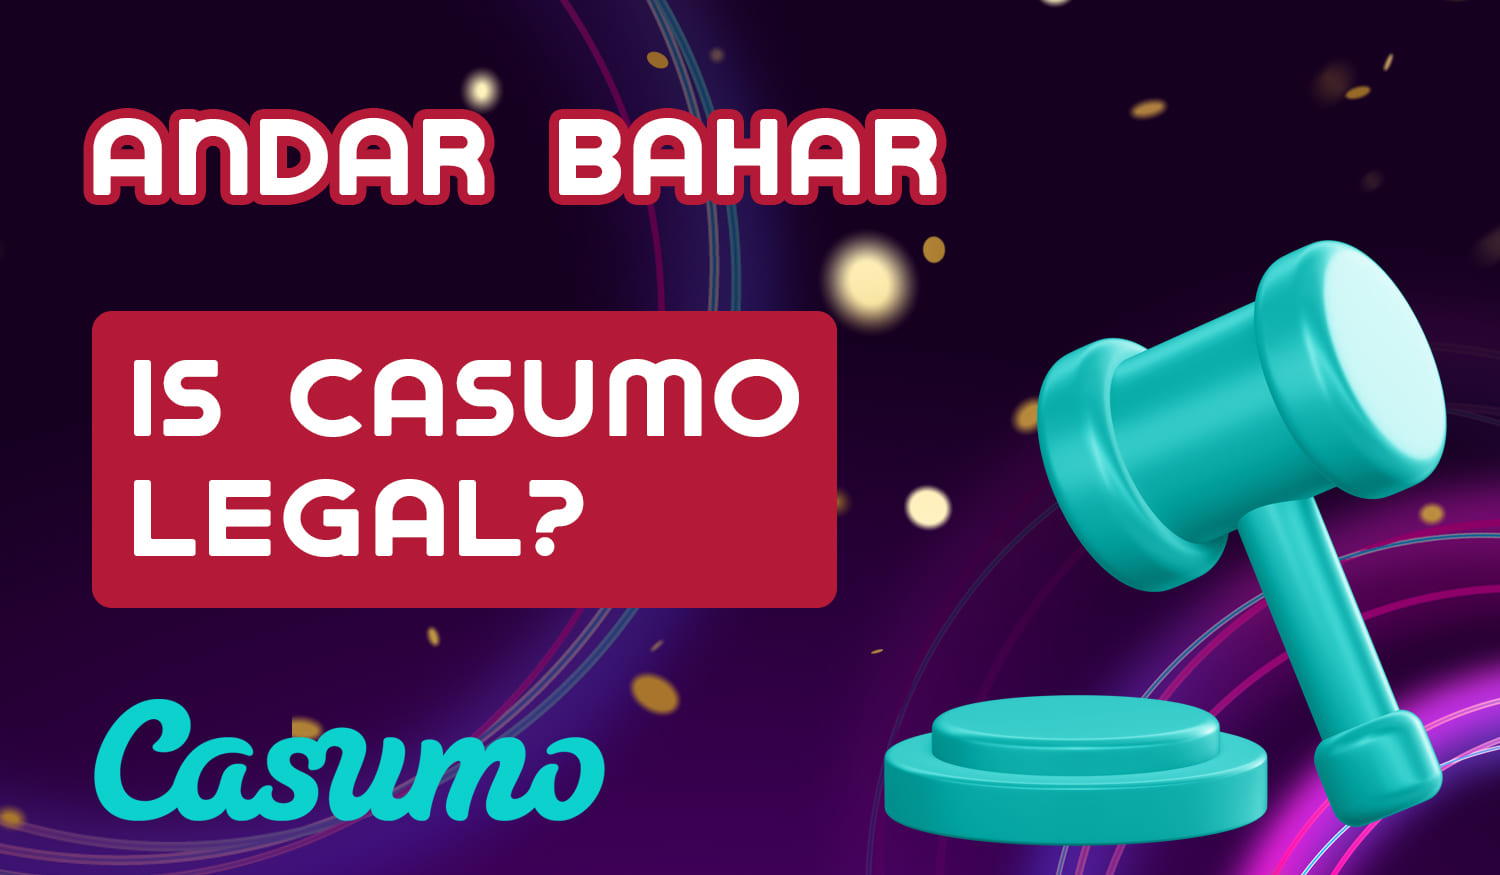 How legally can users from India play andar bahar at Casumo